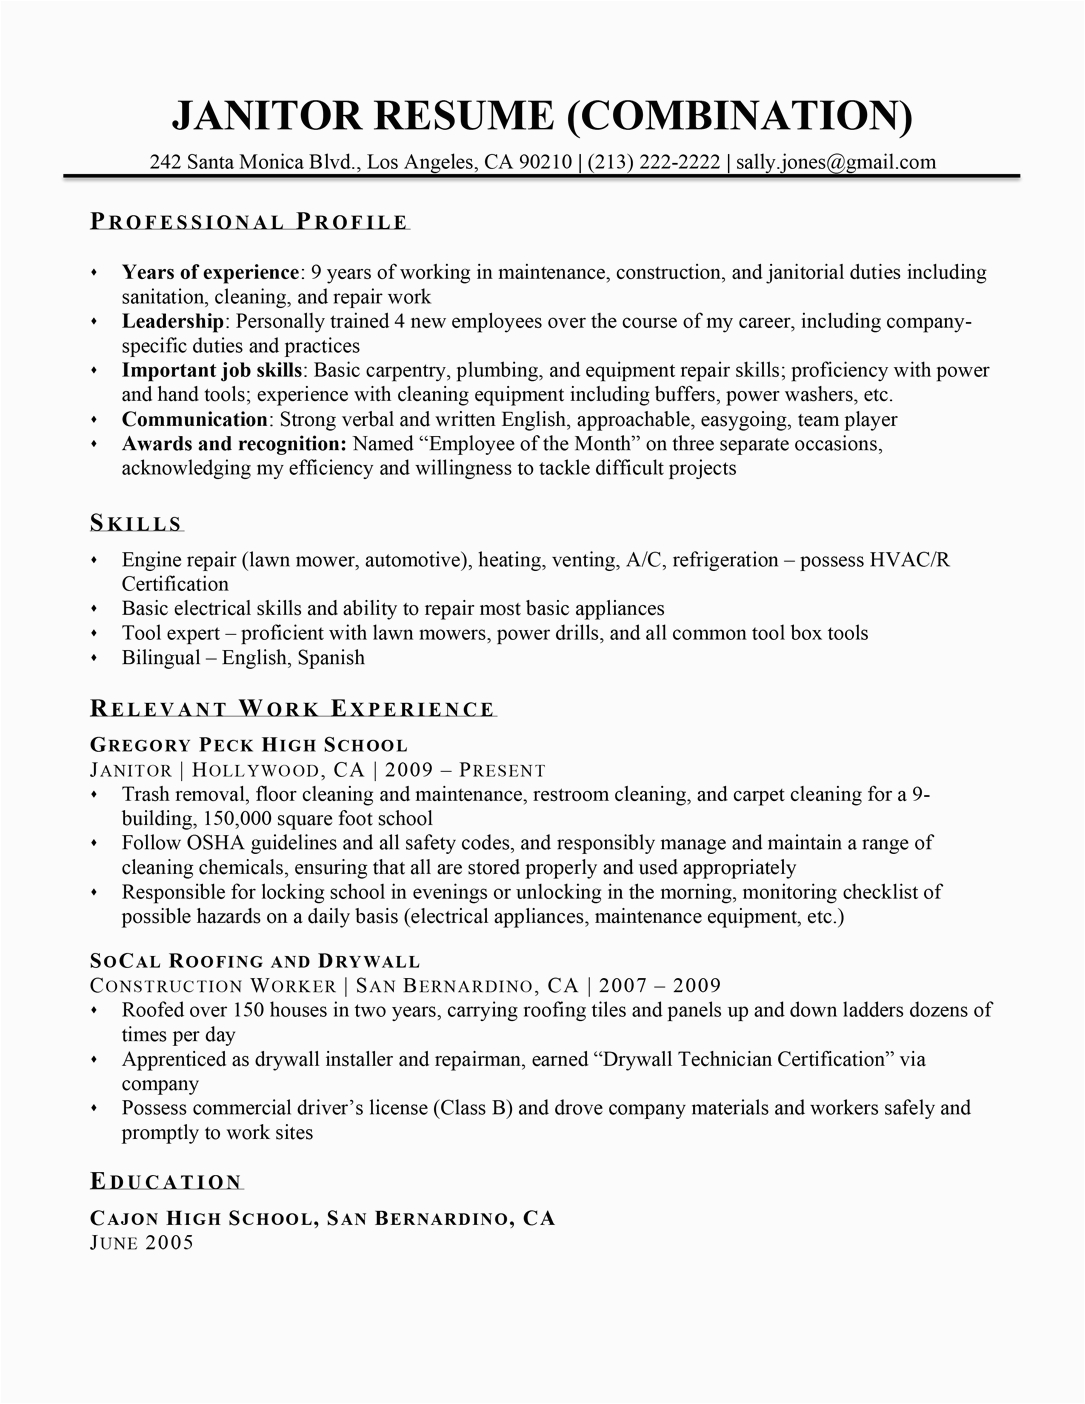 Sample Resume Objective for Janitorial Position Janitor Resume Sample